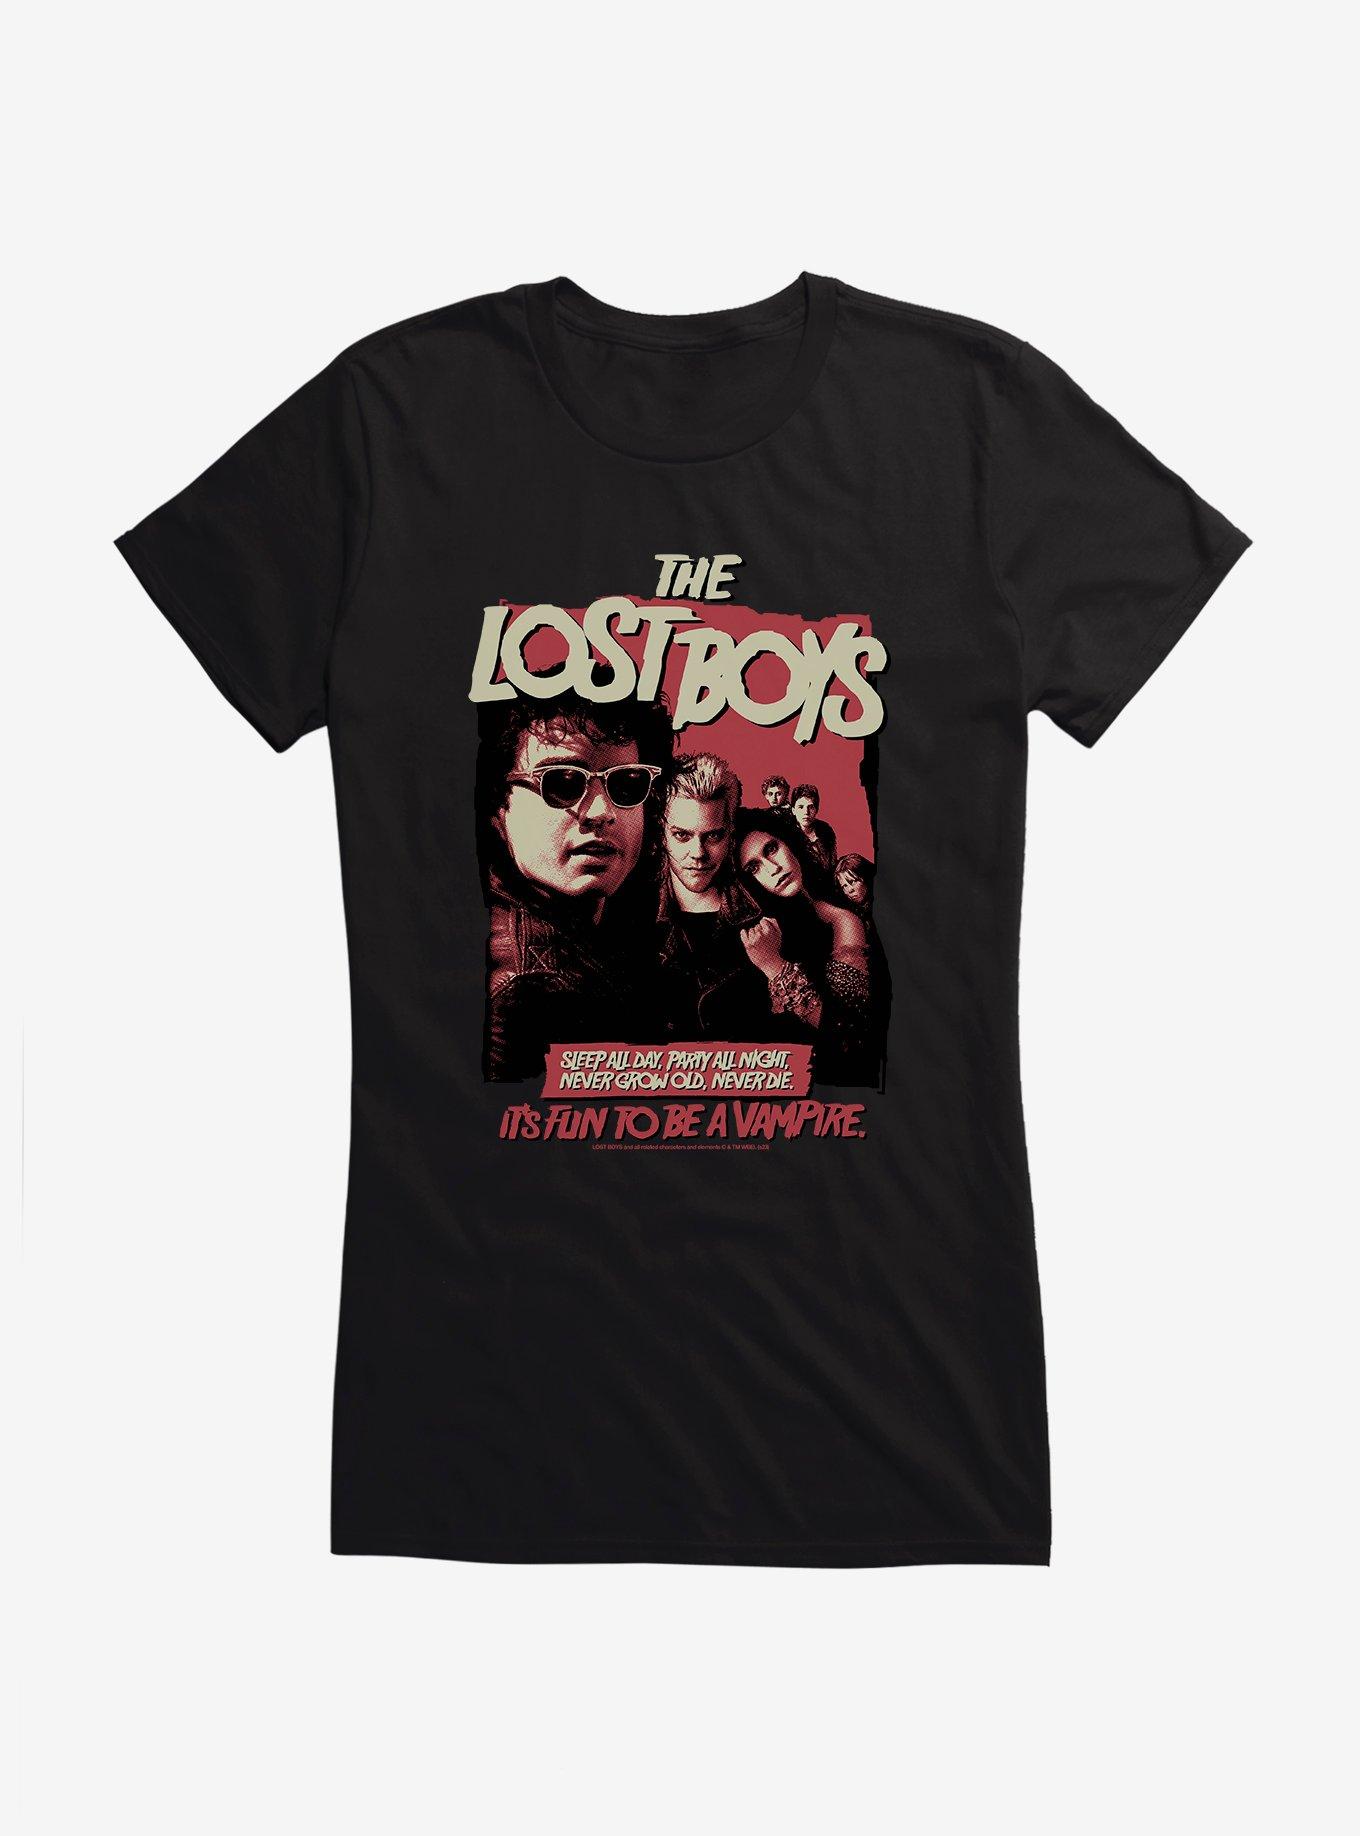 The Lost Boys Fun To Be A Vampire Girls T-Shirt